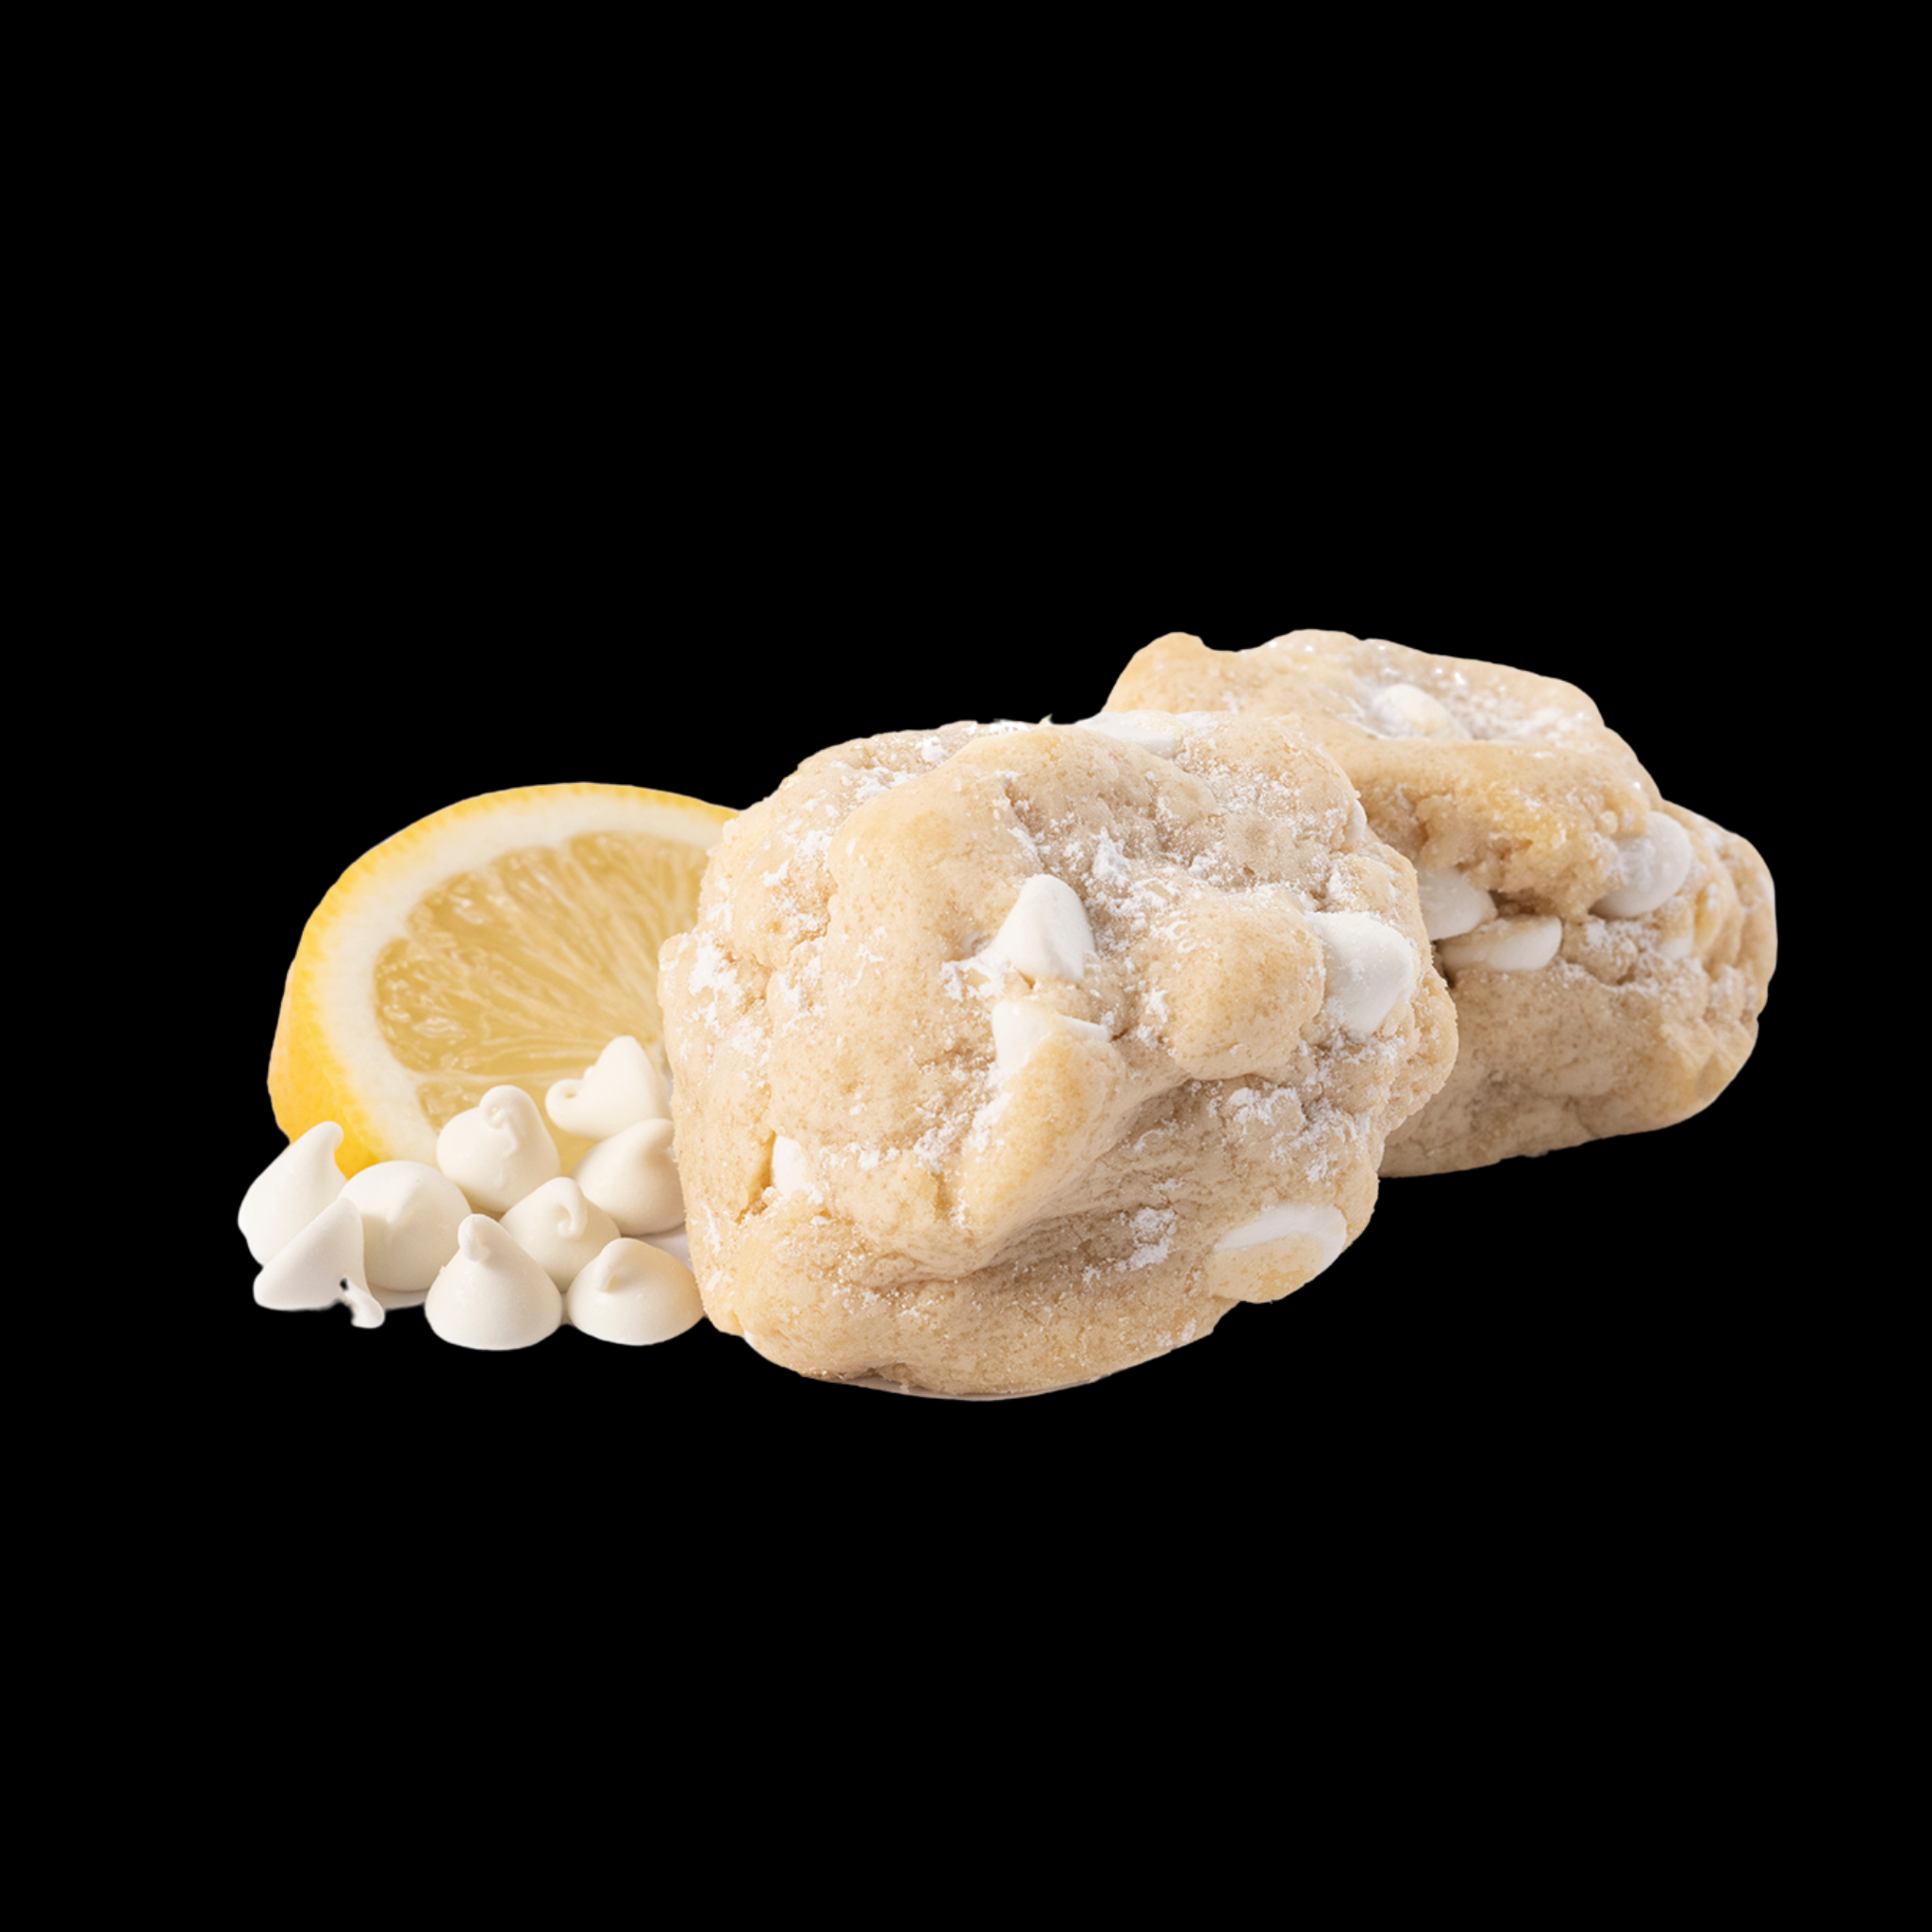 Our gourmet, handcrafted White Chocolate Lemon Chiffon cookie. | Monica's Gourmet Cookies